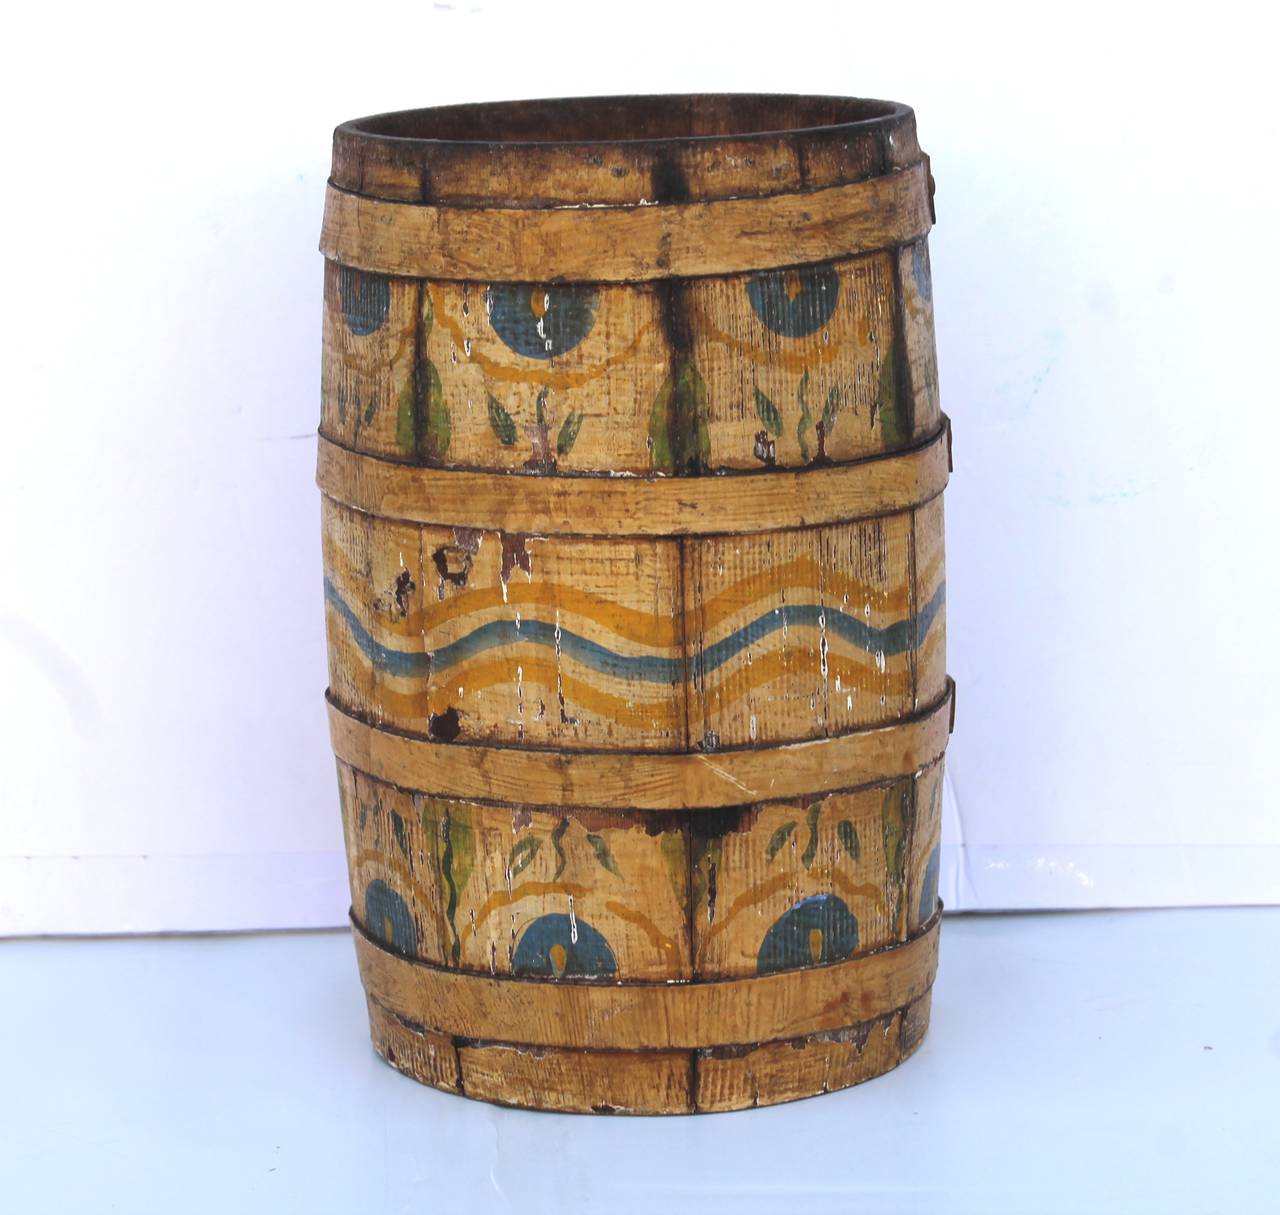 This fun small-scale barrel is in great as found condition and was found in New England. The lid is missing as it was probably a cardboard or heavy paper seal. The back round mustard painted surface is the best patina. it has metal bands that are